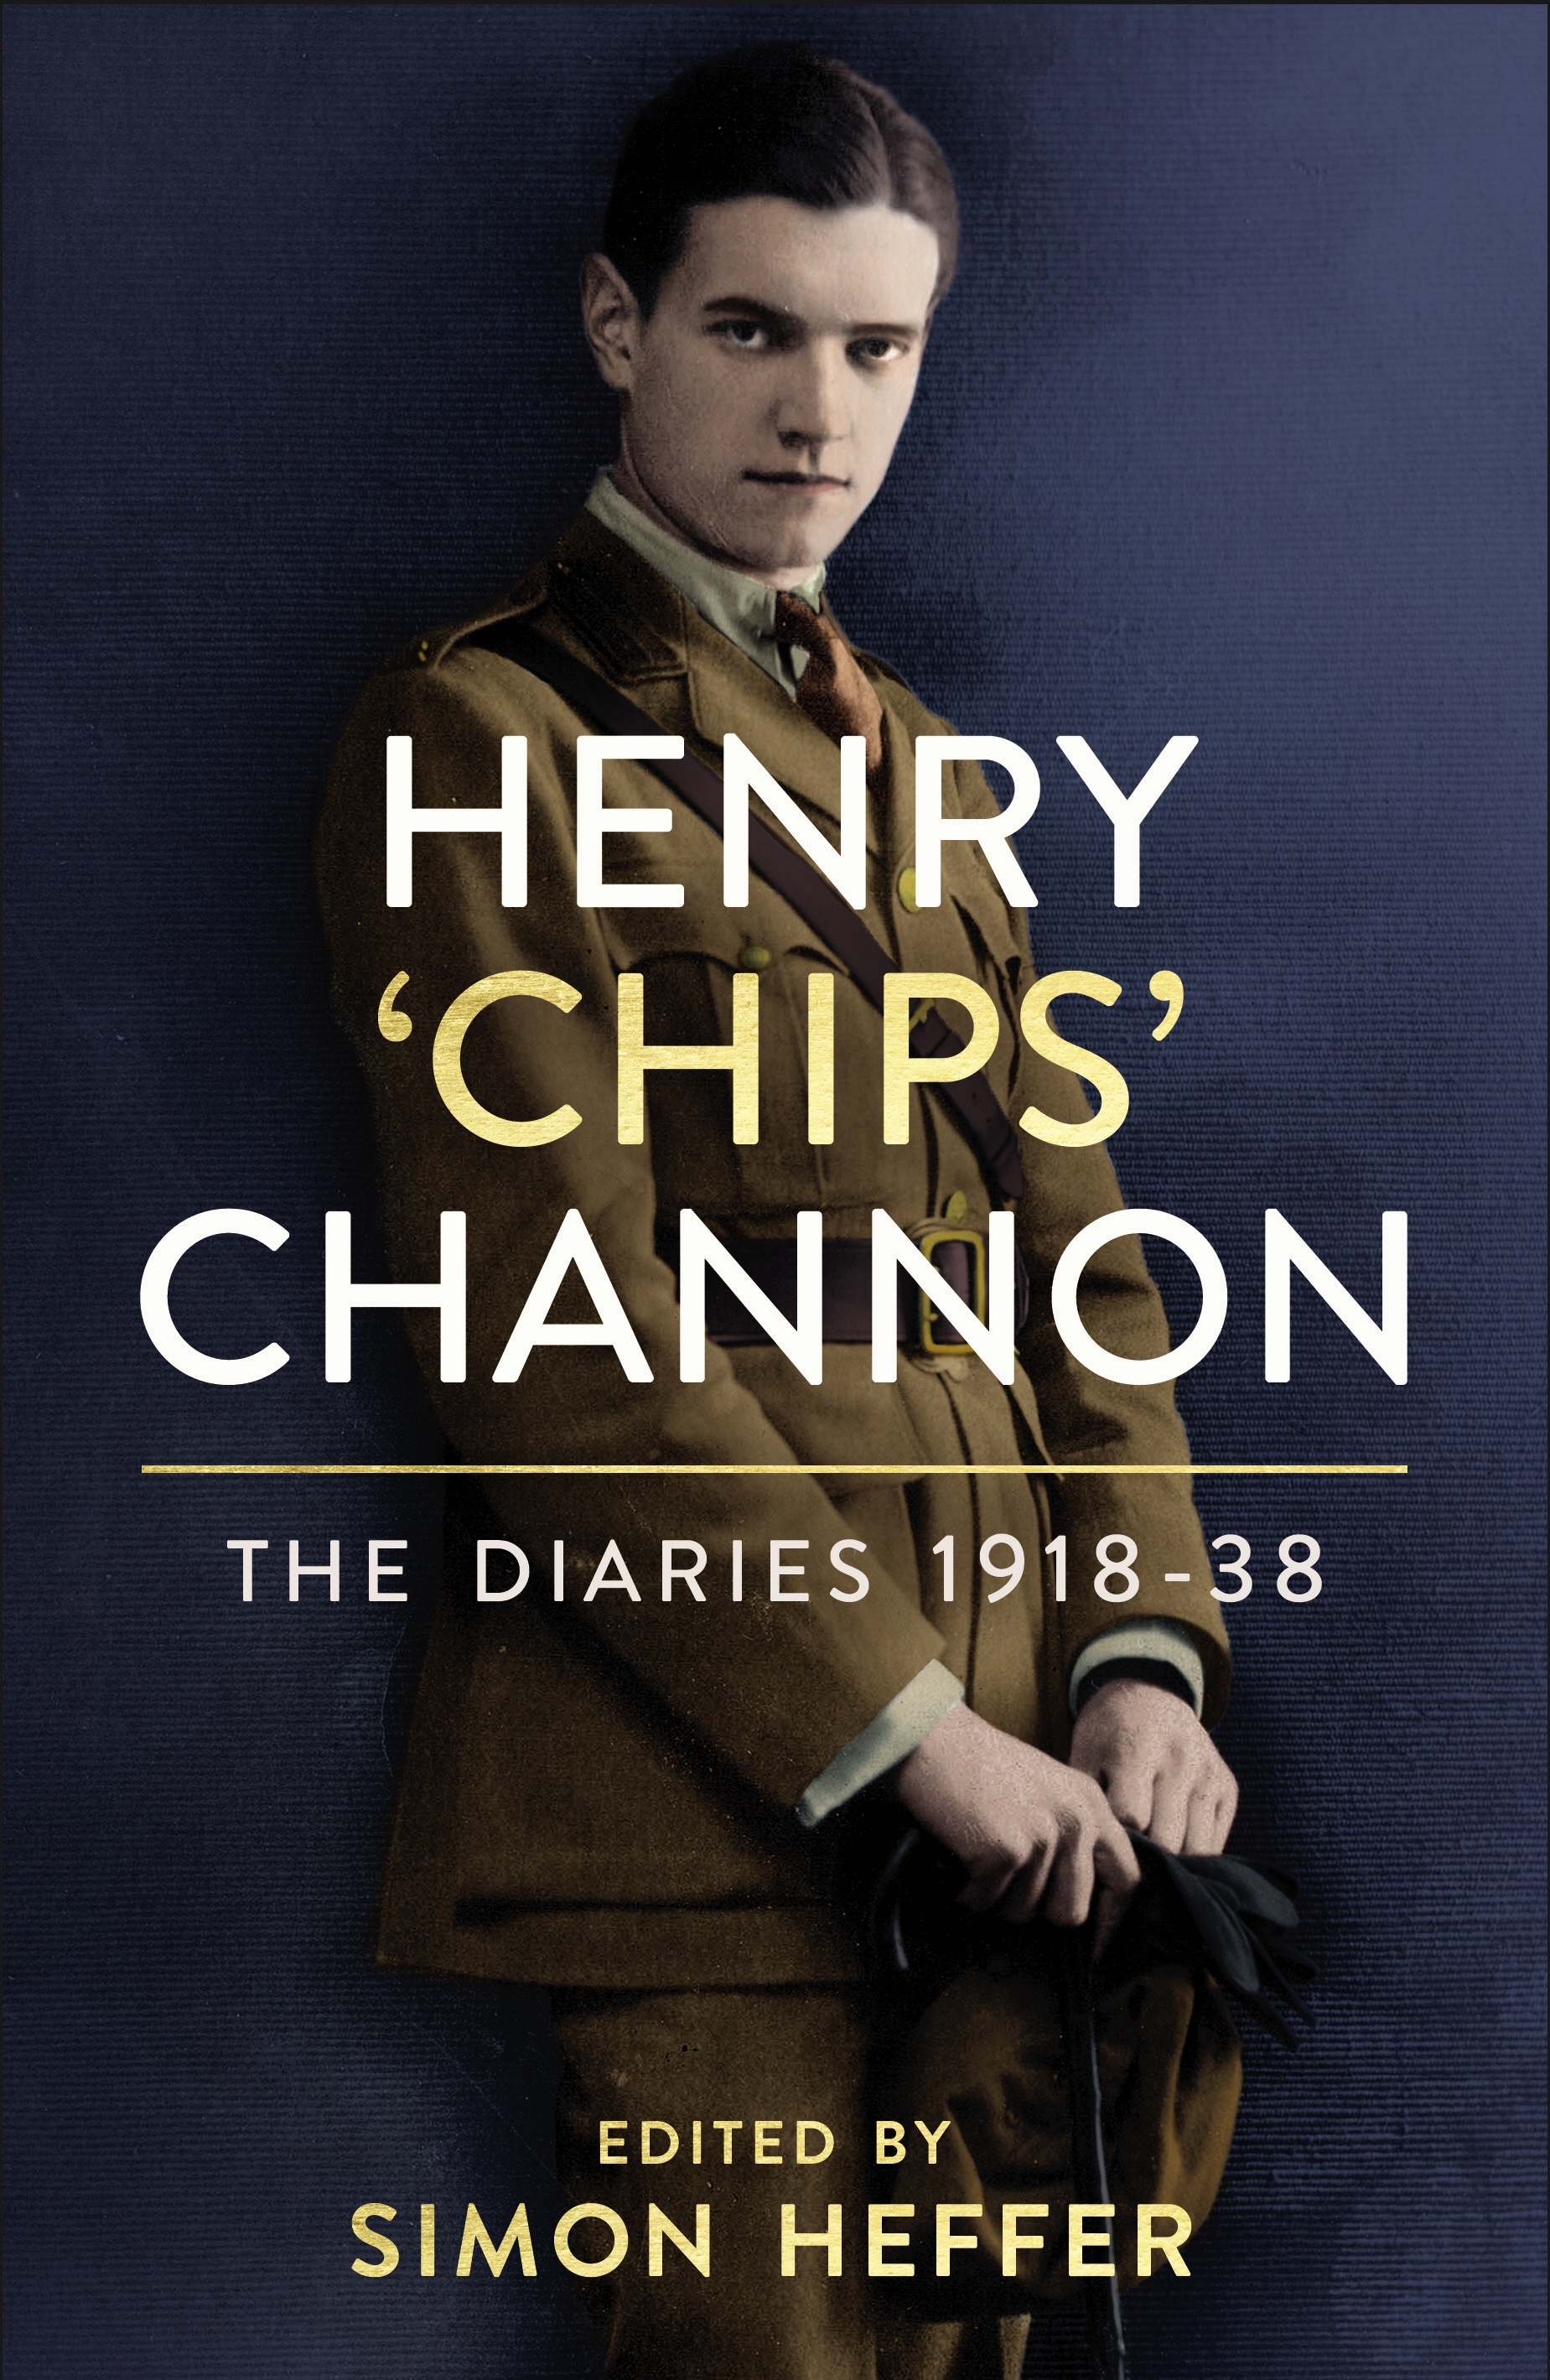 Book “Henry ‘Chips’ Channon: The Diaries (Volume 1)” by Chips Channon — March 4, 2021